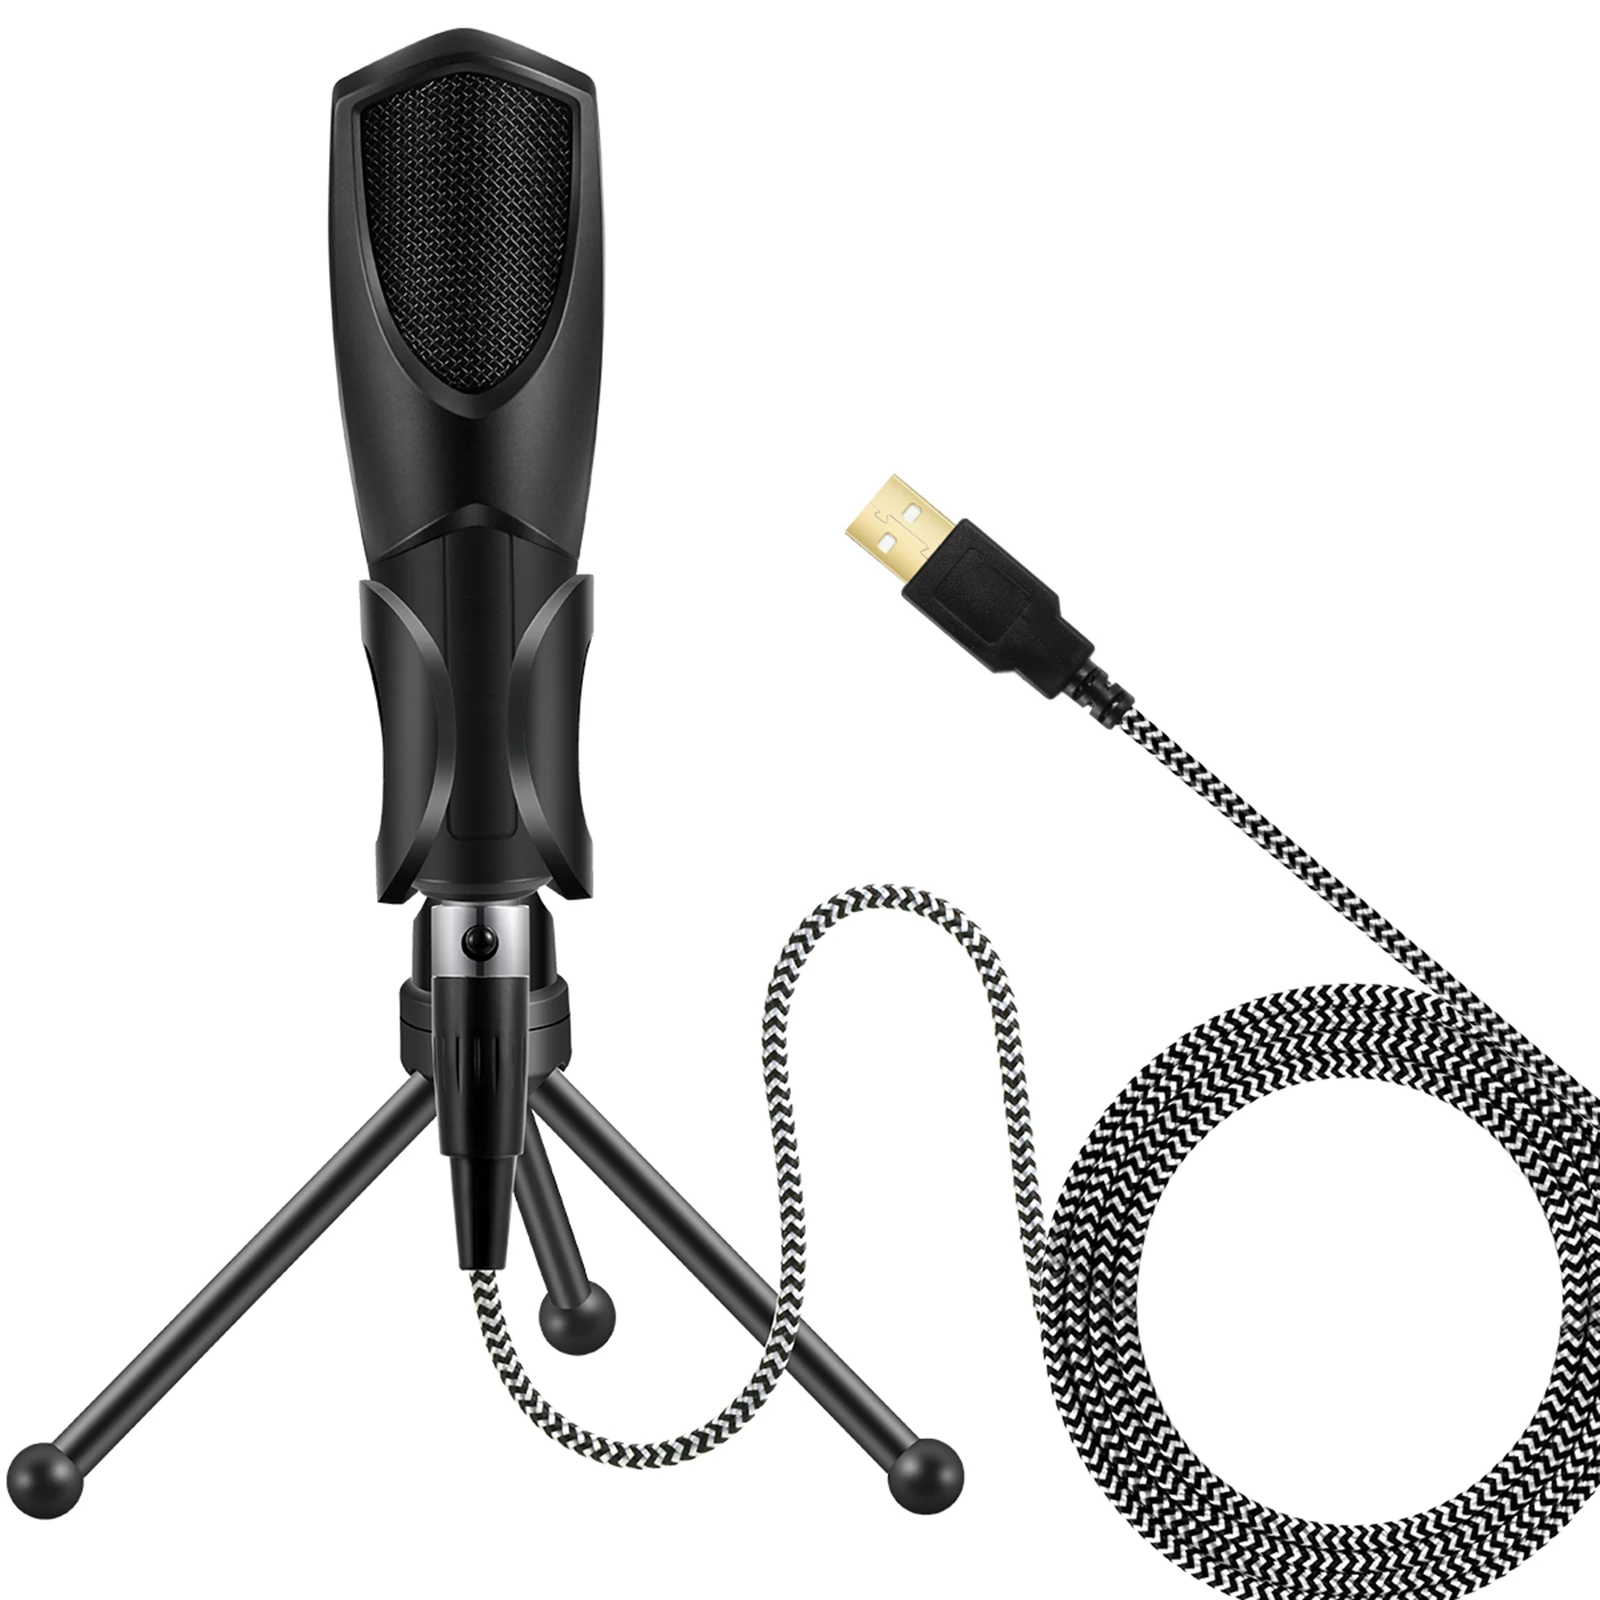 

USB Condenser Microphone Plug And Play Microphone With Tripod Stand Sponge Windscreen For Computer Video Chat Recording Black